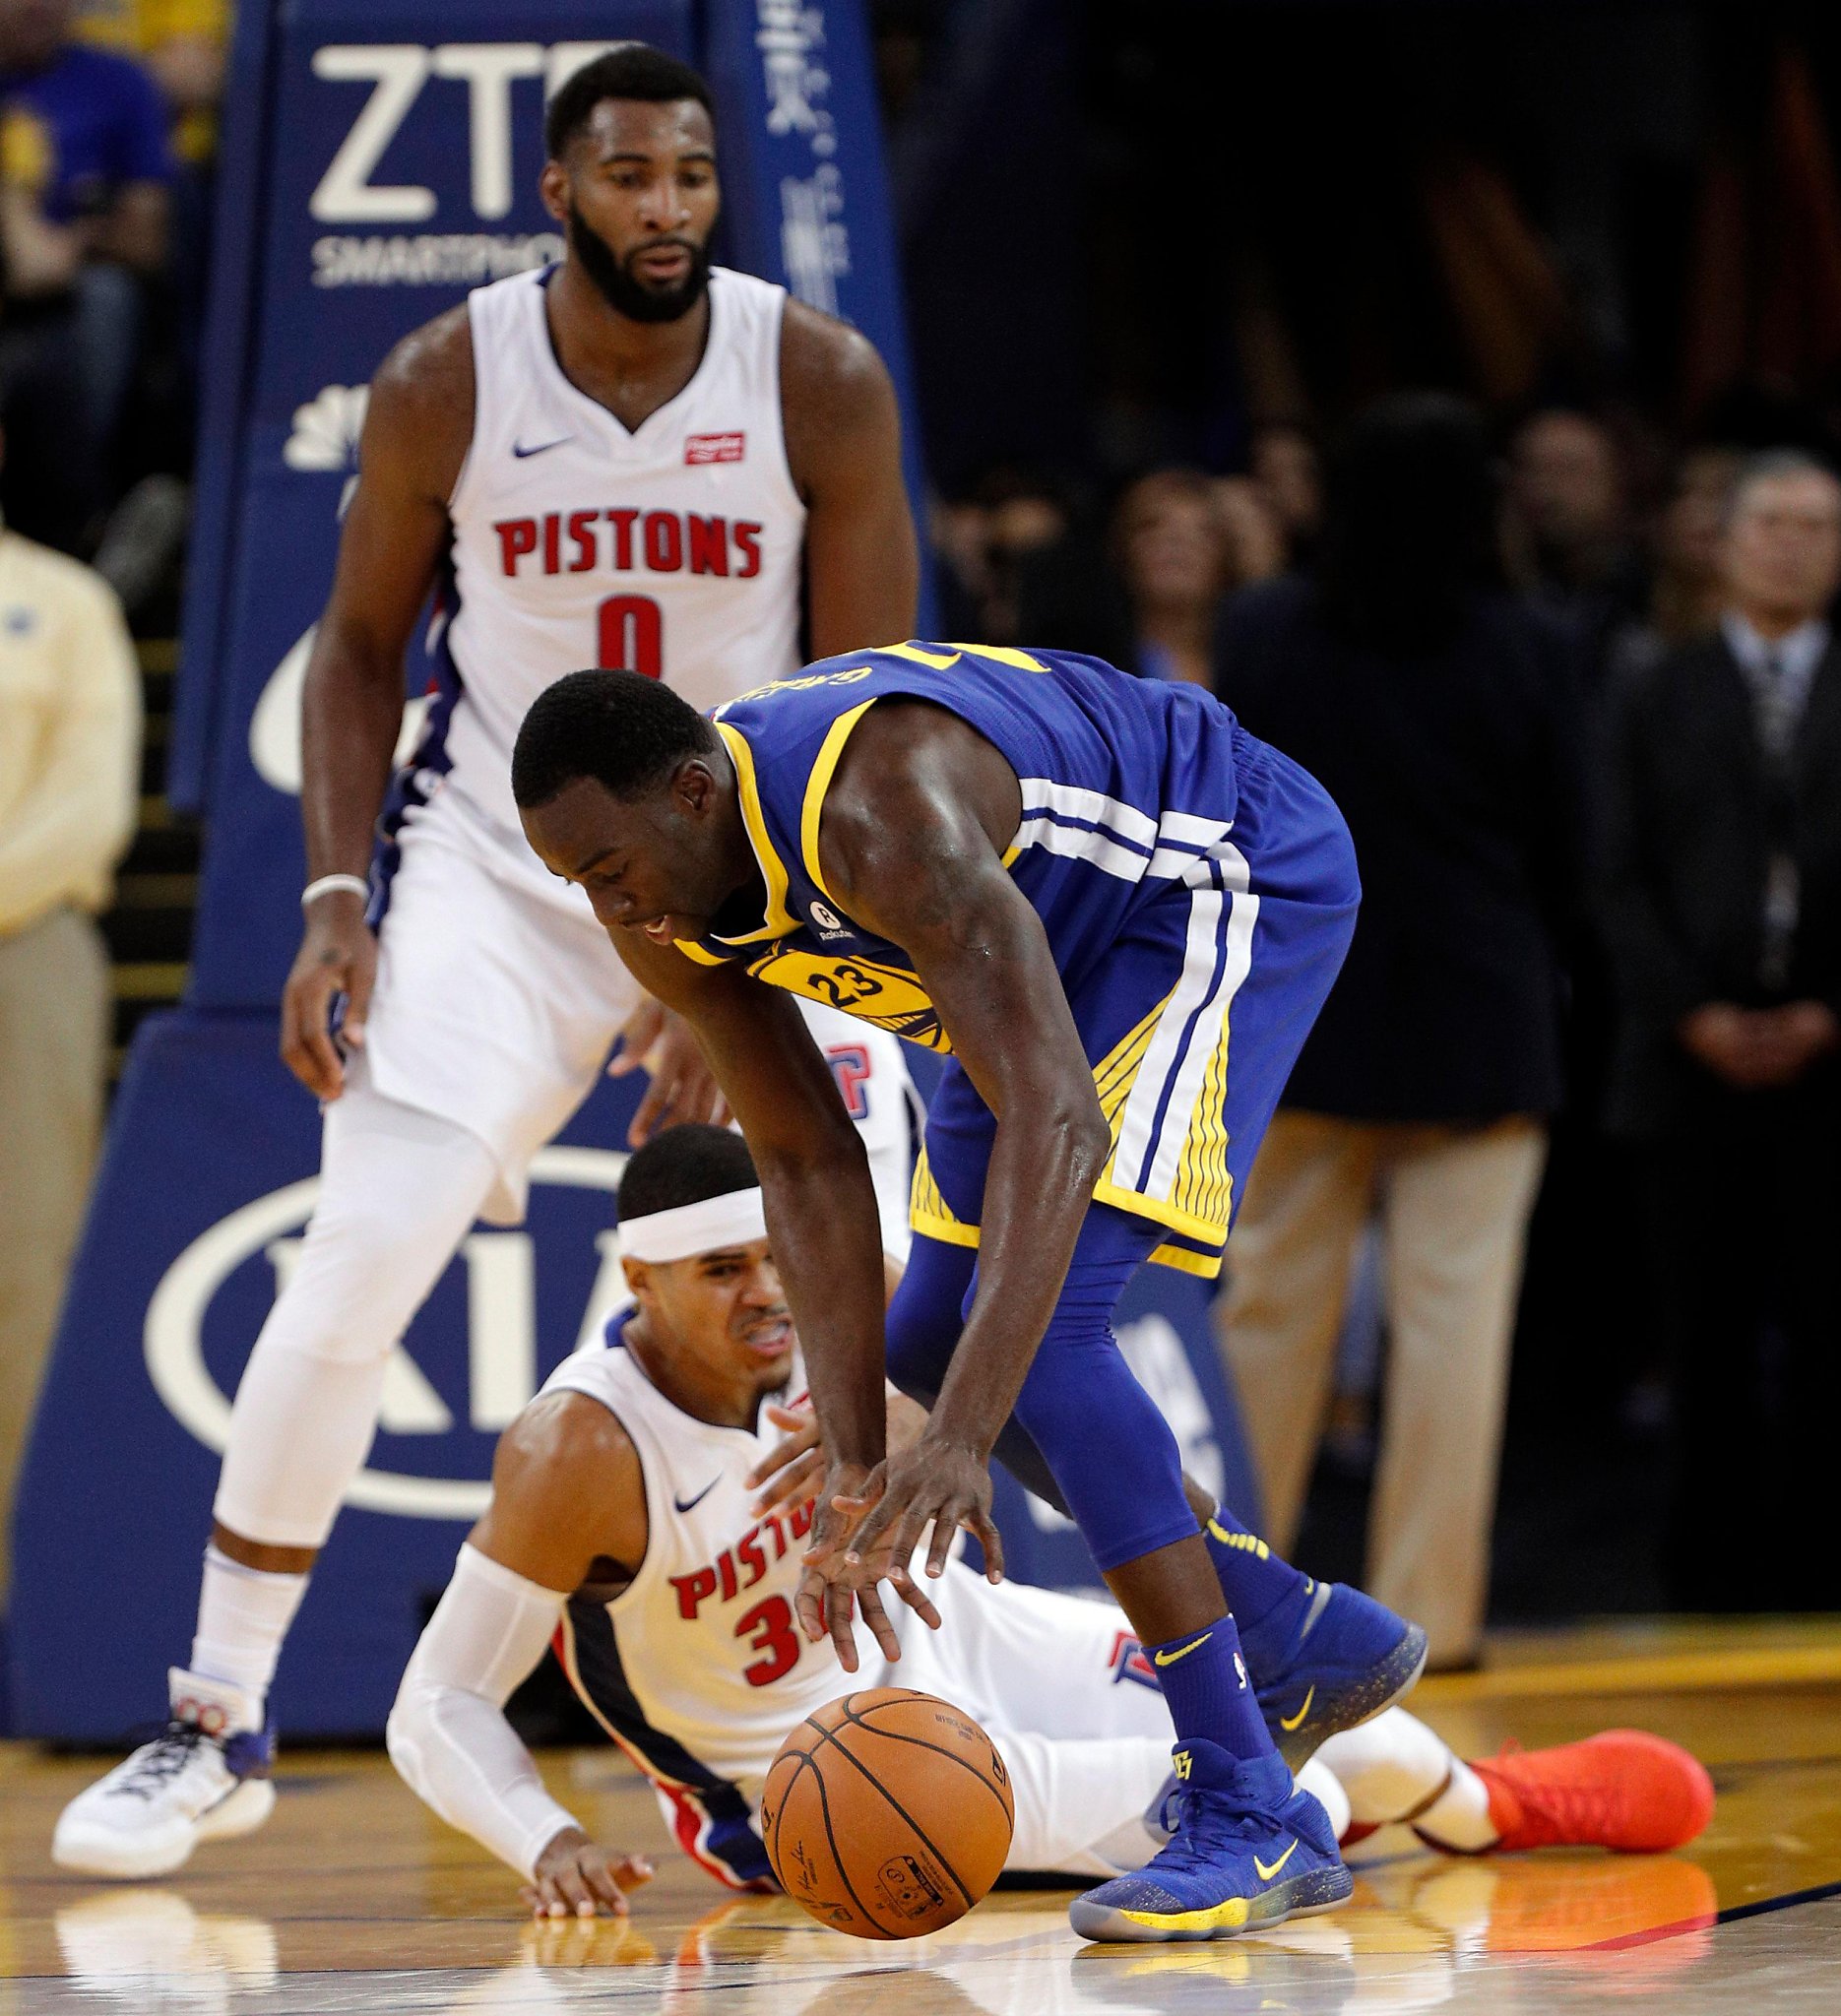 Warriors game day: Can Golden State cut down turnovers vs. Clippers? - SFGate